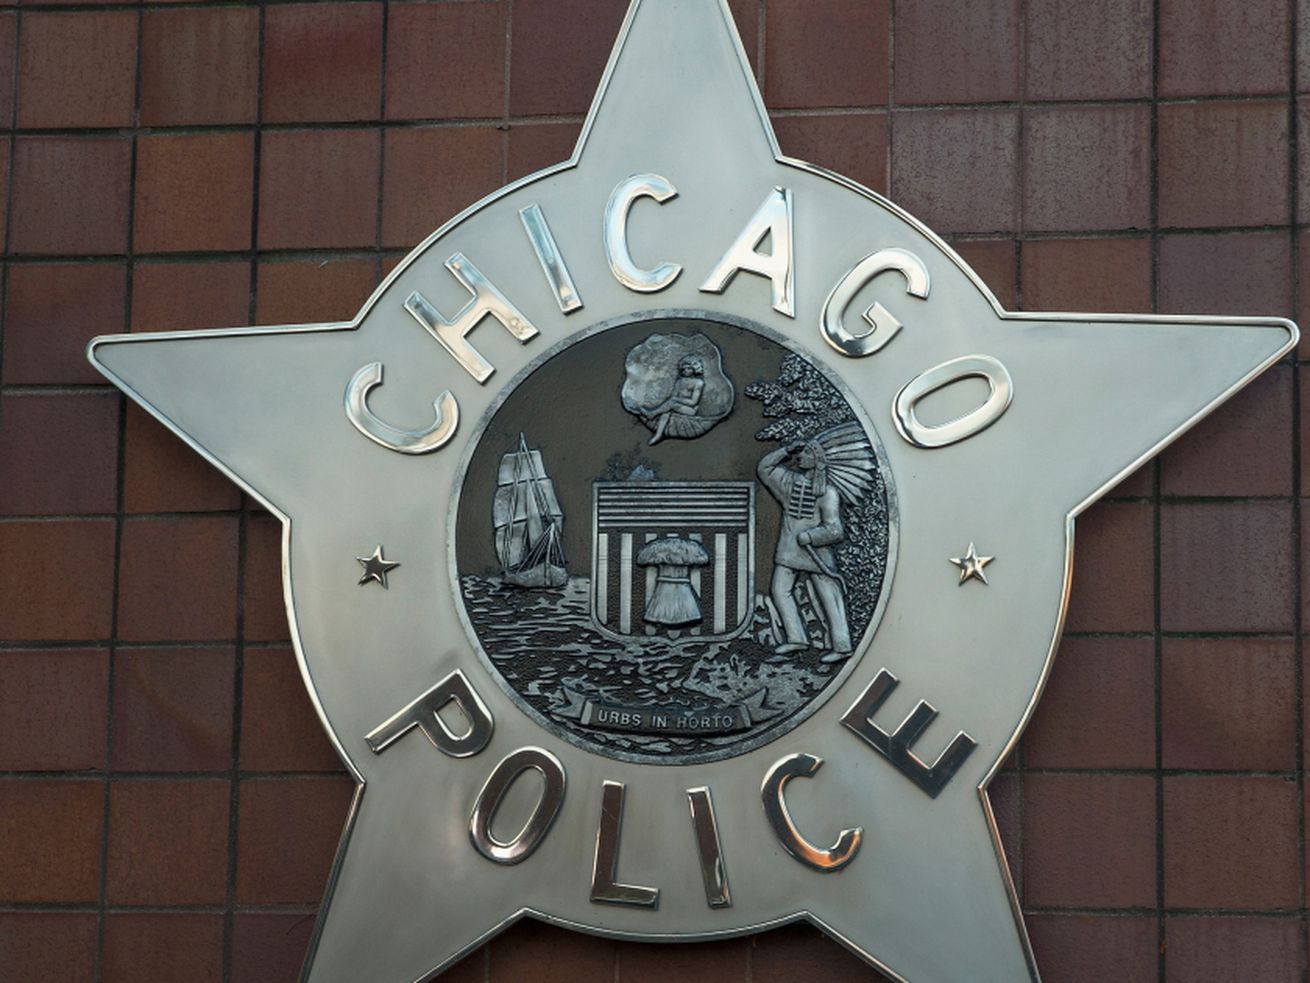 Researchers at the University of Chicago have been awarded more than $1.2 million to study how police officers respond in high-stakes situations and what factors come into play in officer-involved shootings.